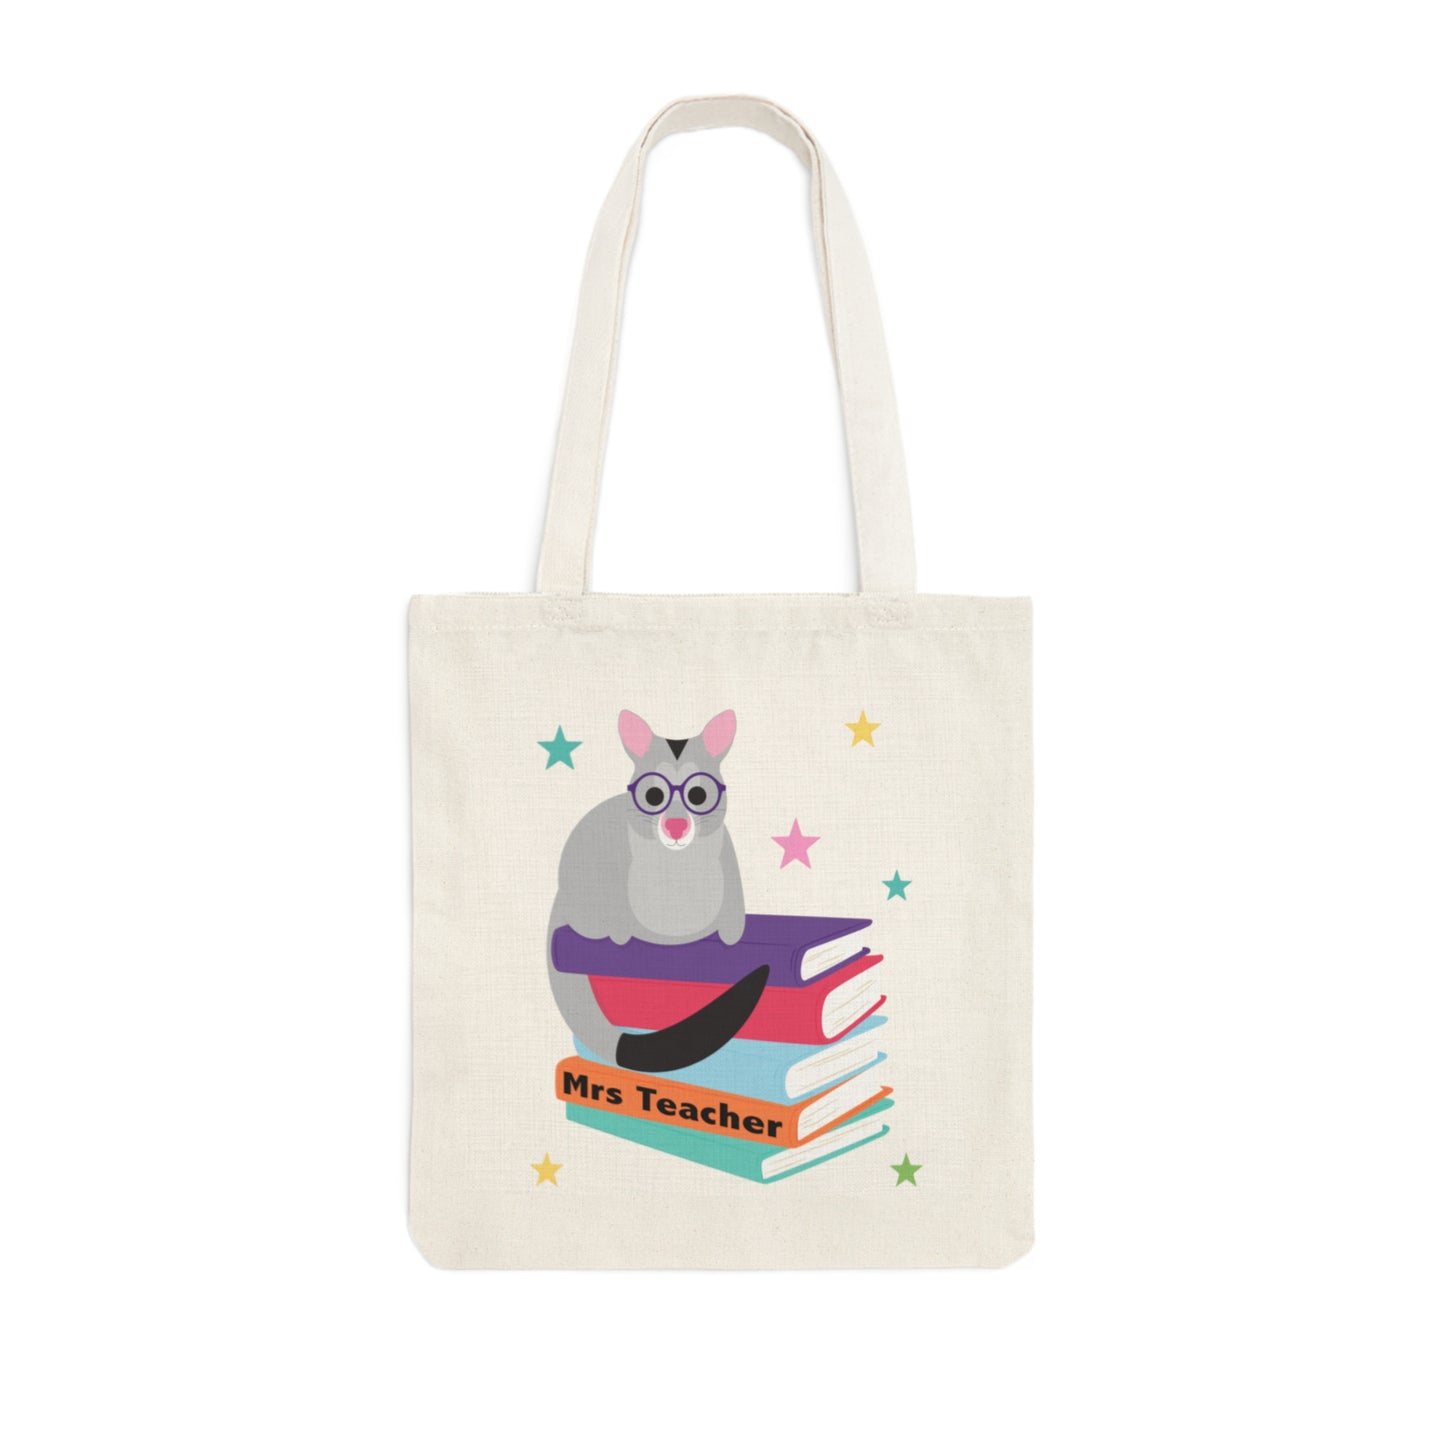  personalised teacher tote bag with possum in glasses sitting on a stack of books